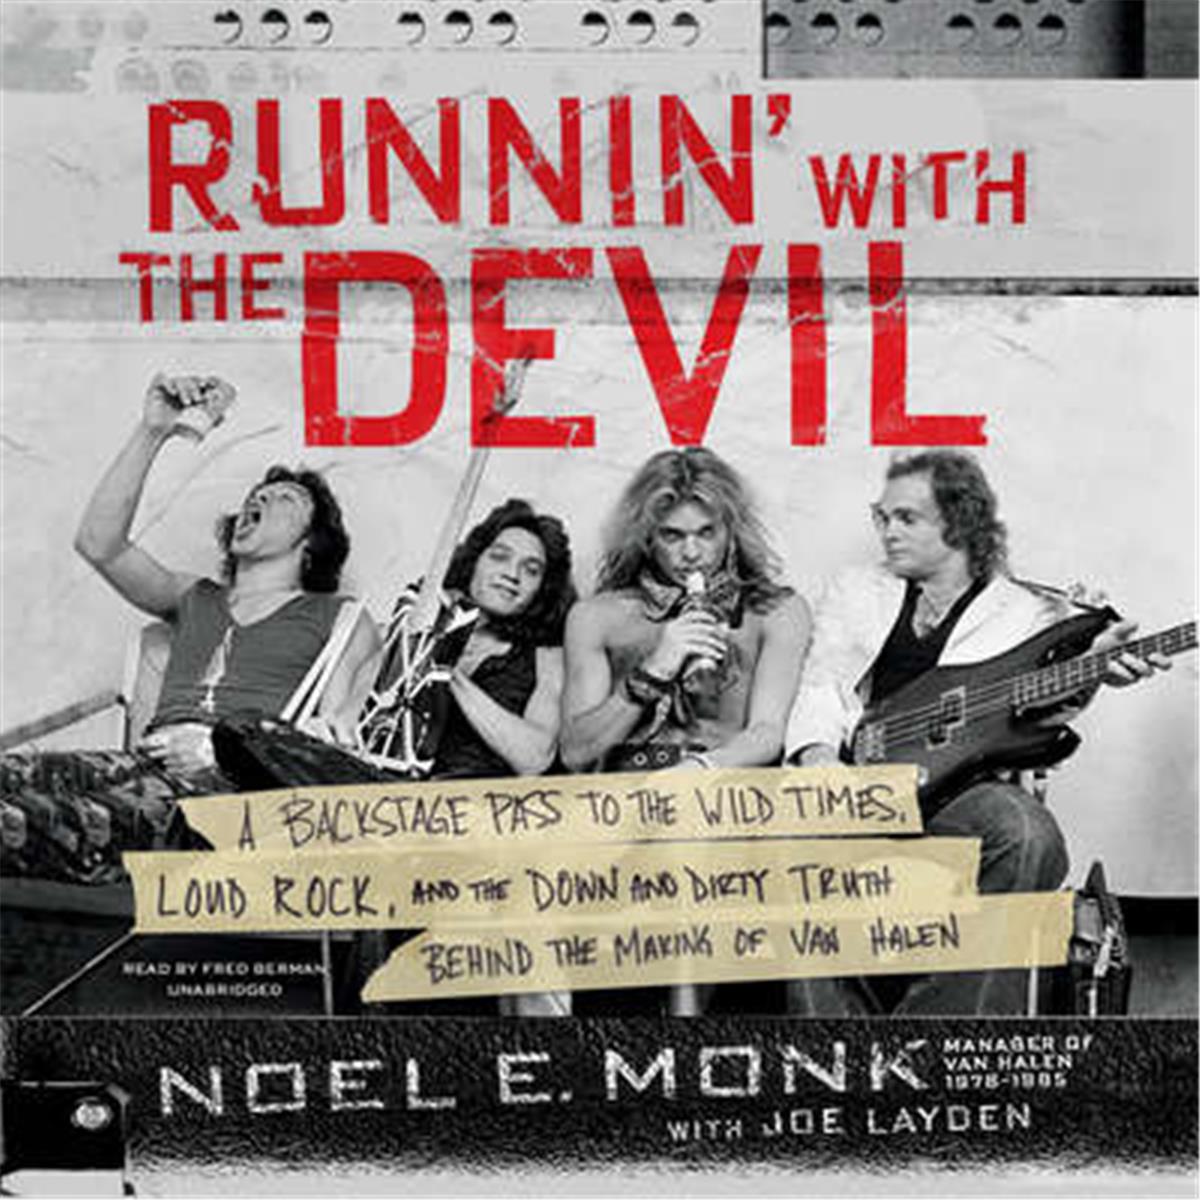 Picture of Blackstone Audio 9781470855819 Running With The Devil - A Backstage Pass To The Wild Times Audio Book